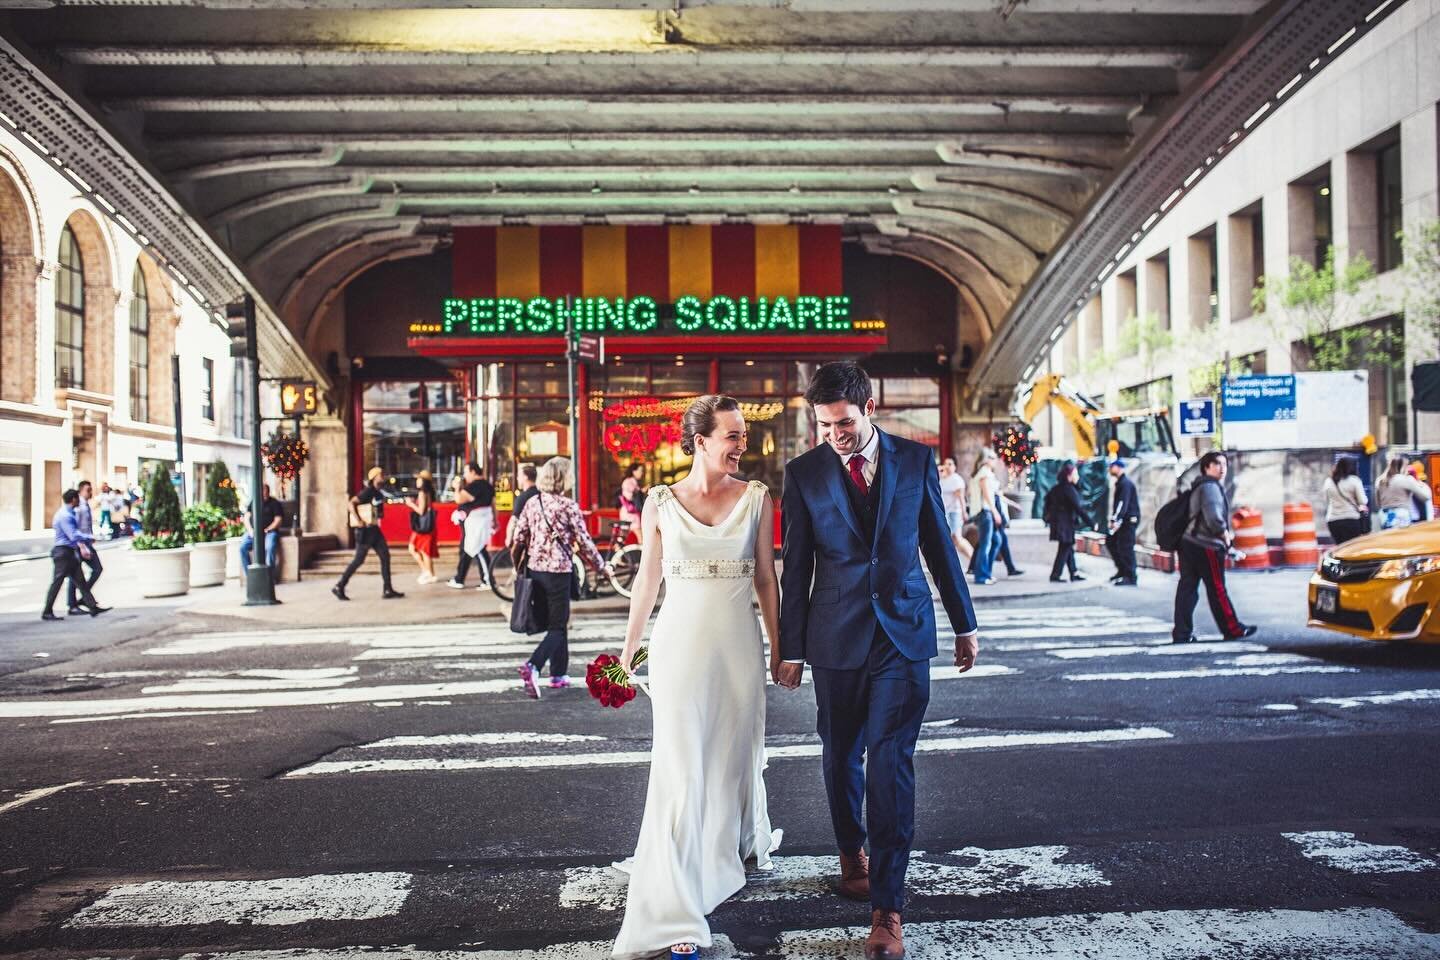 April 2016 was the last time I was in NYC&hellip; for not one but these two incredible weddings. That was my fourth visit (I think) and my first in springtime - which I highly recommend. 

I was supposed to be there for my 50th last year but life had